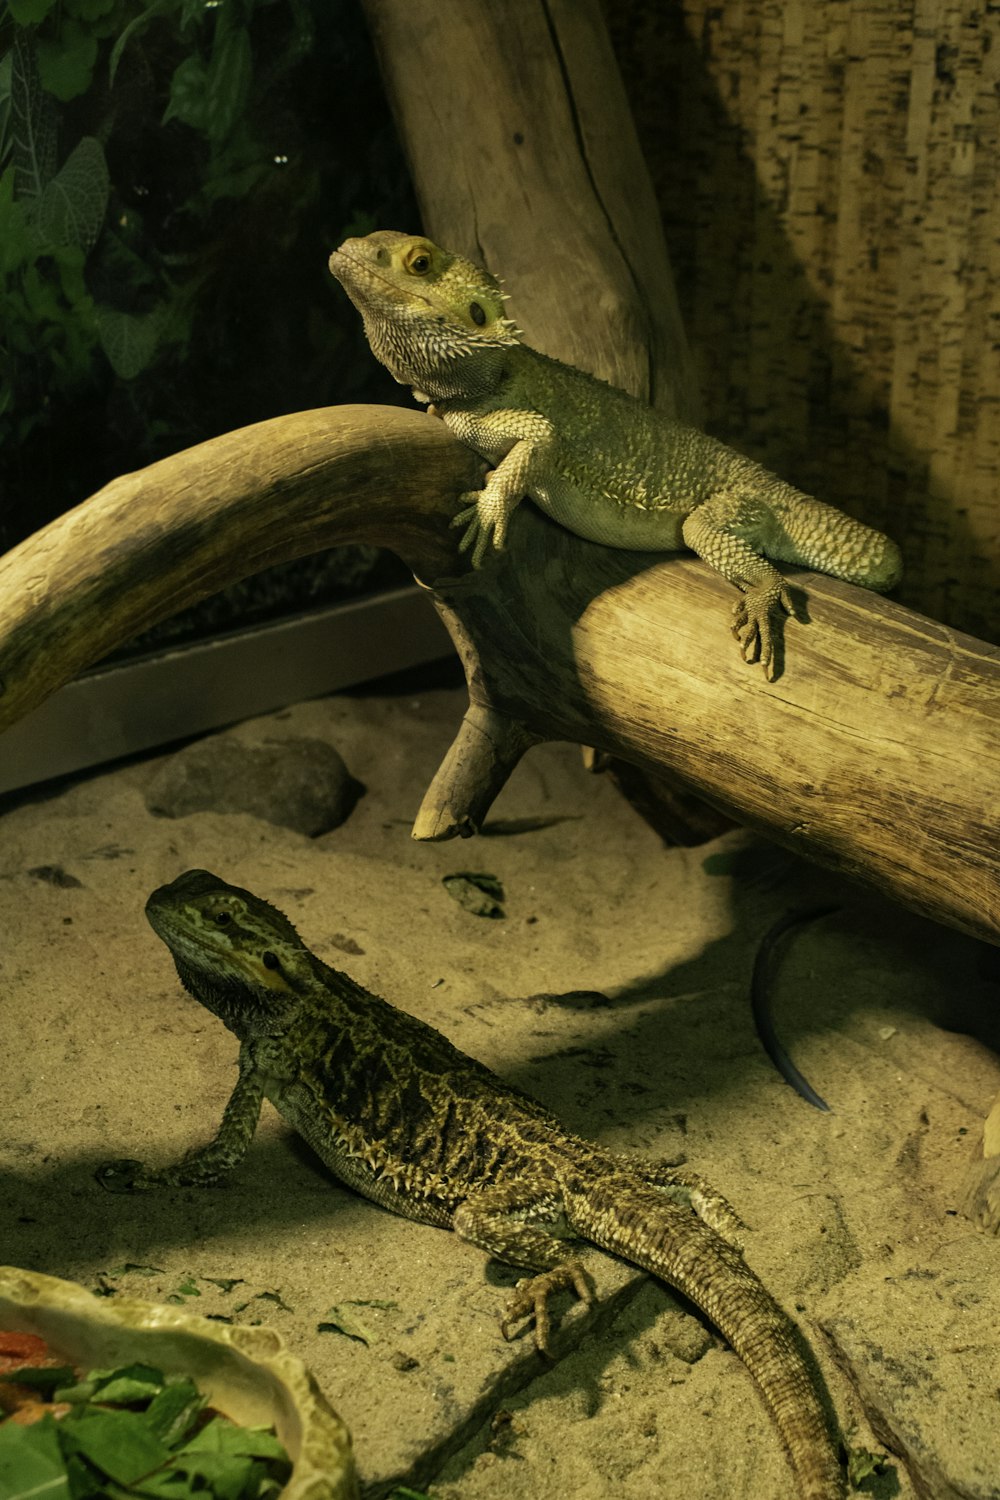 a lizard sitting on top of a wooden branch